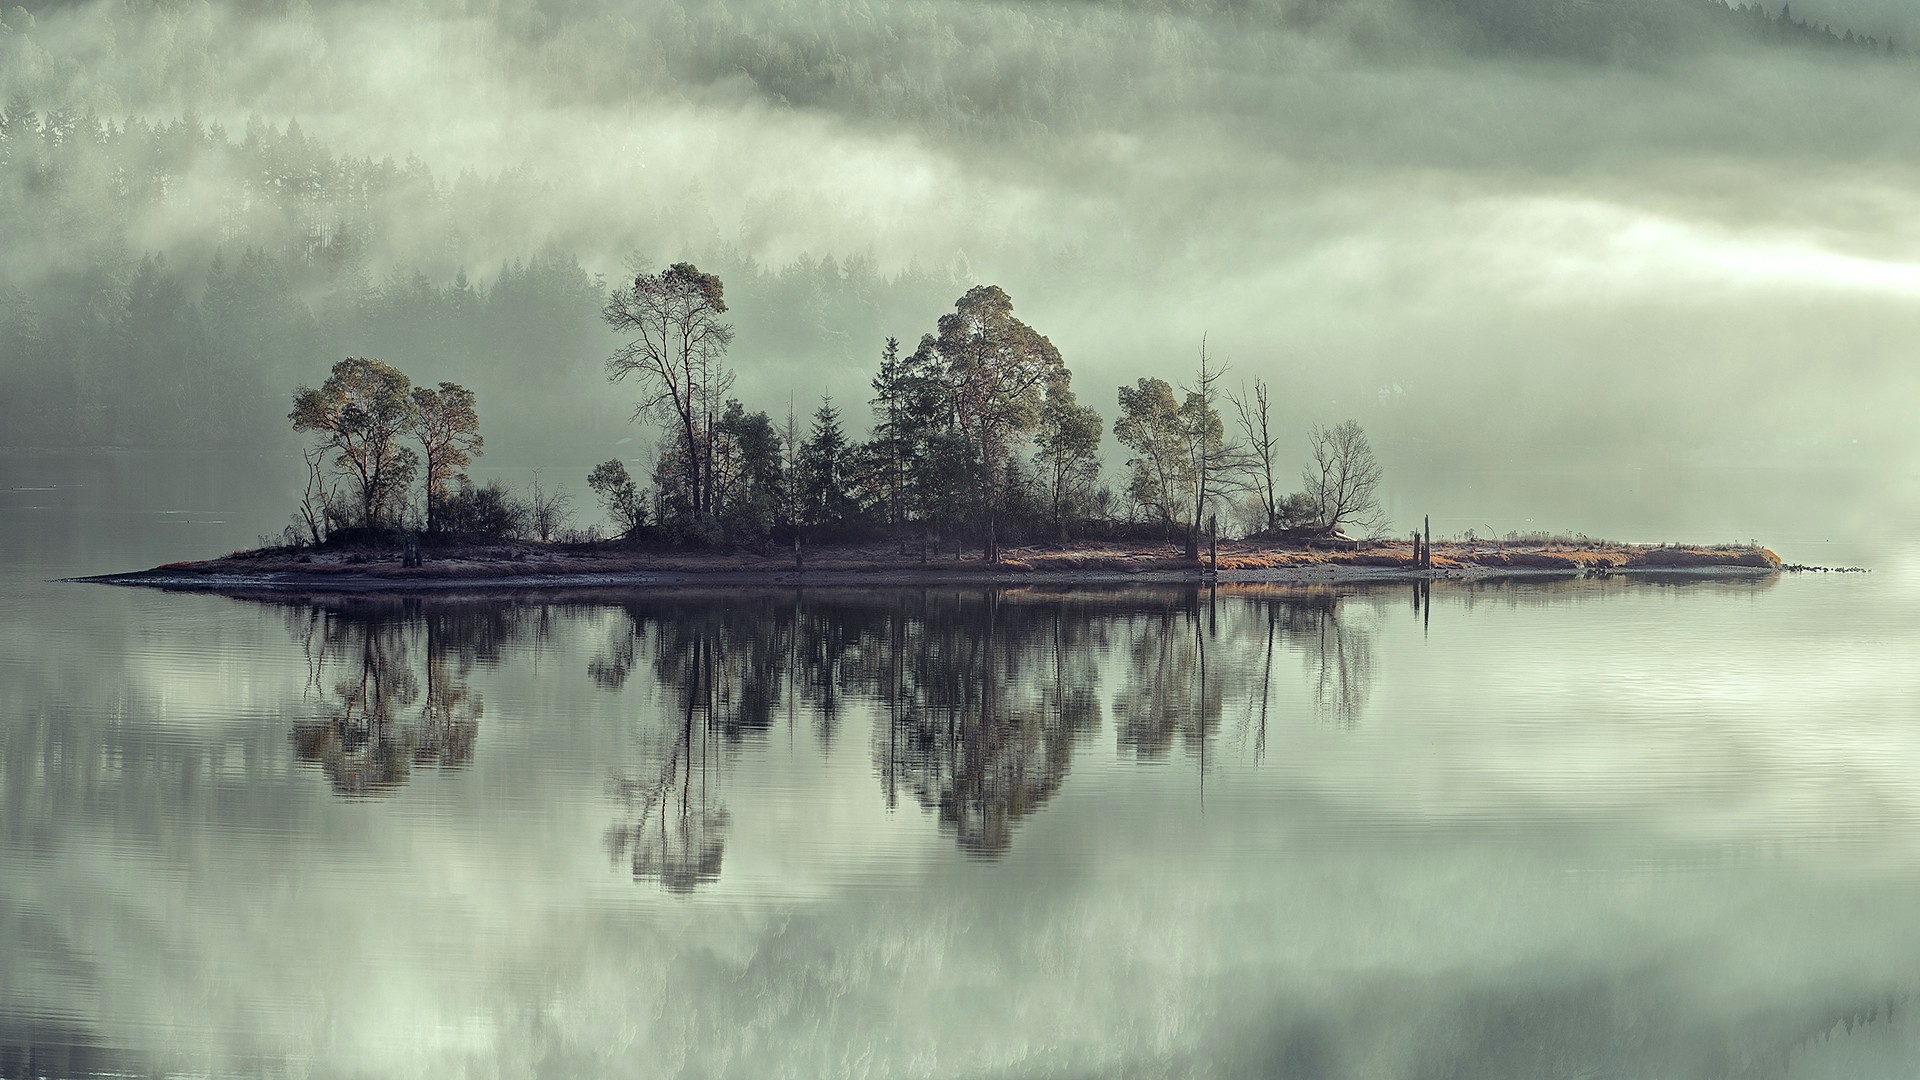 General 1920x1080 nature landscape trees mist forest water lake island clouds reflection